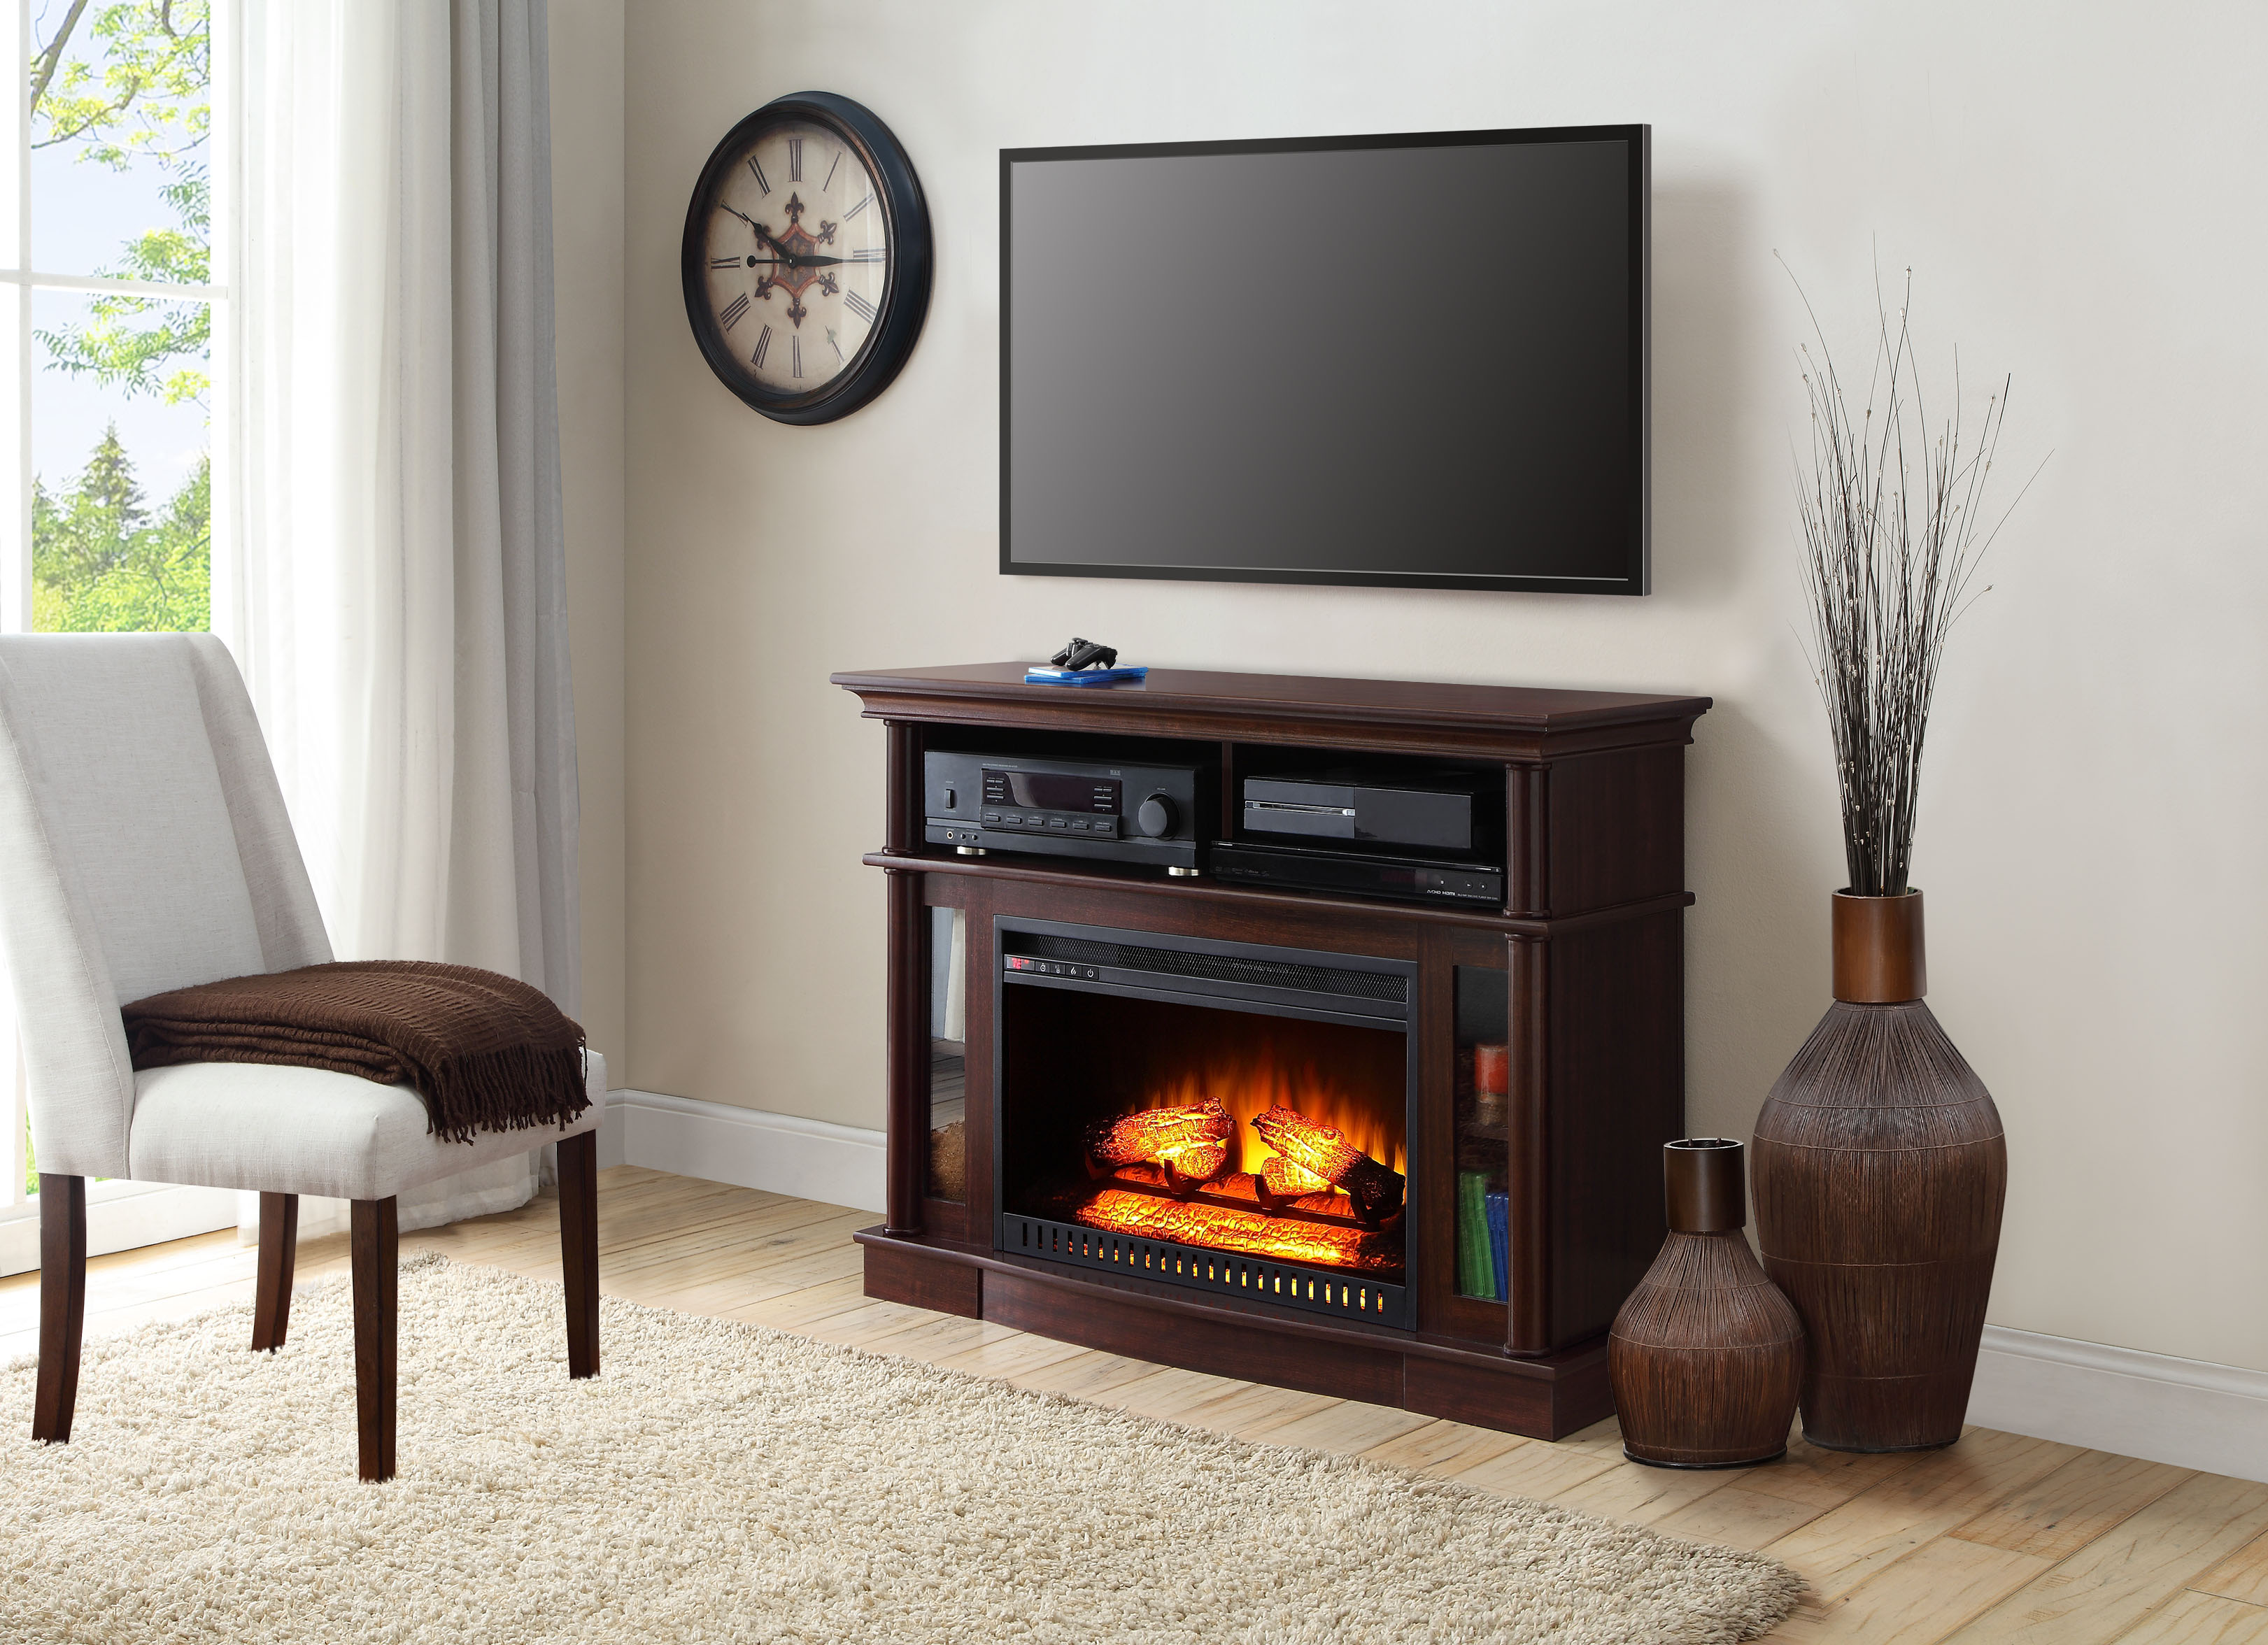 Better Homes & Gardens Ashwood Road Media Fireplace for TVs up to 45" - image 2 of 13